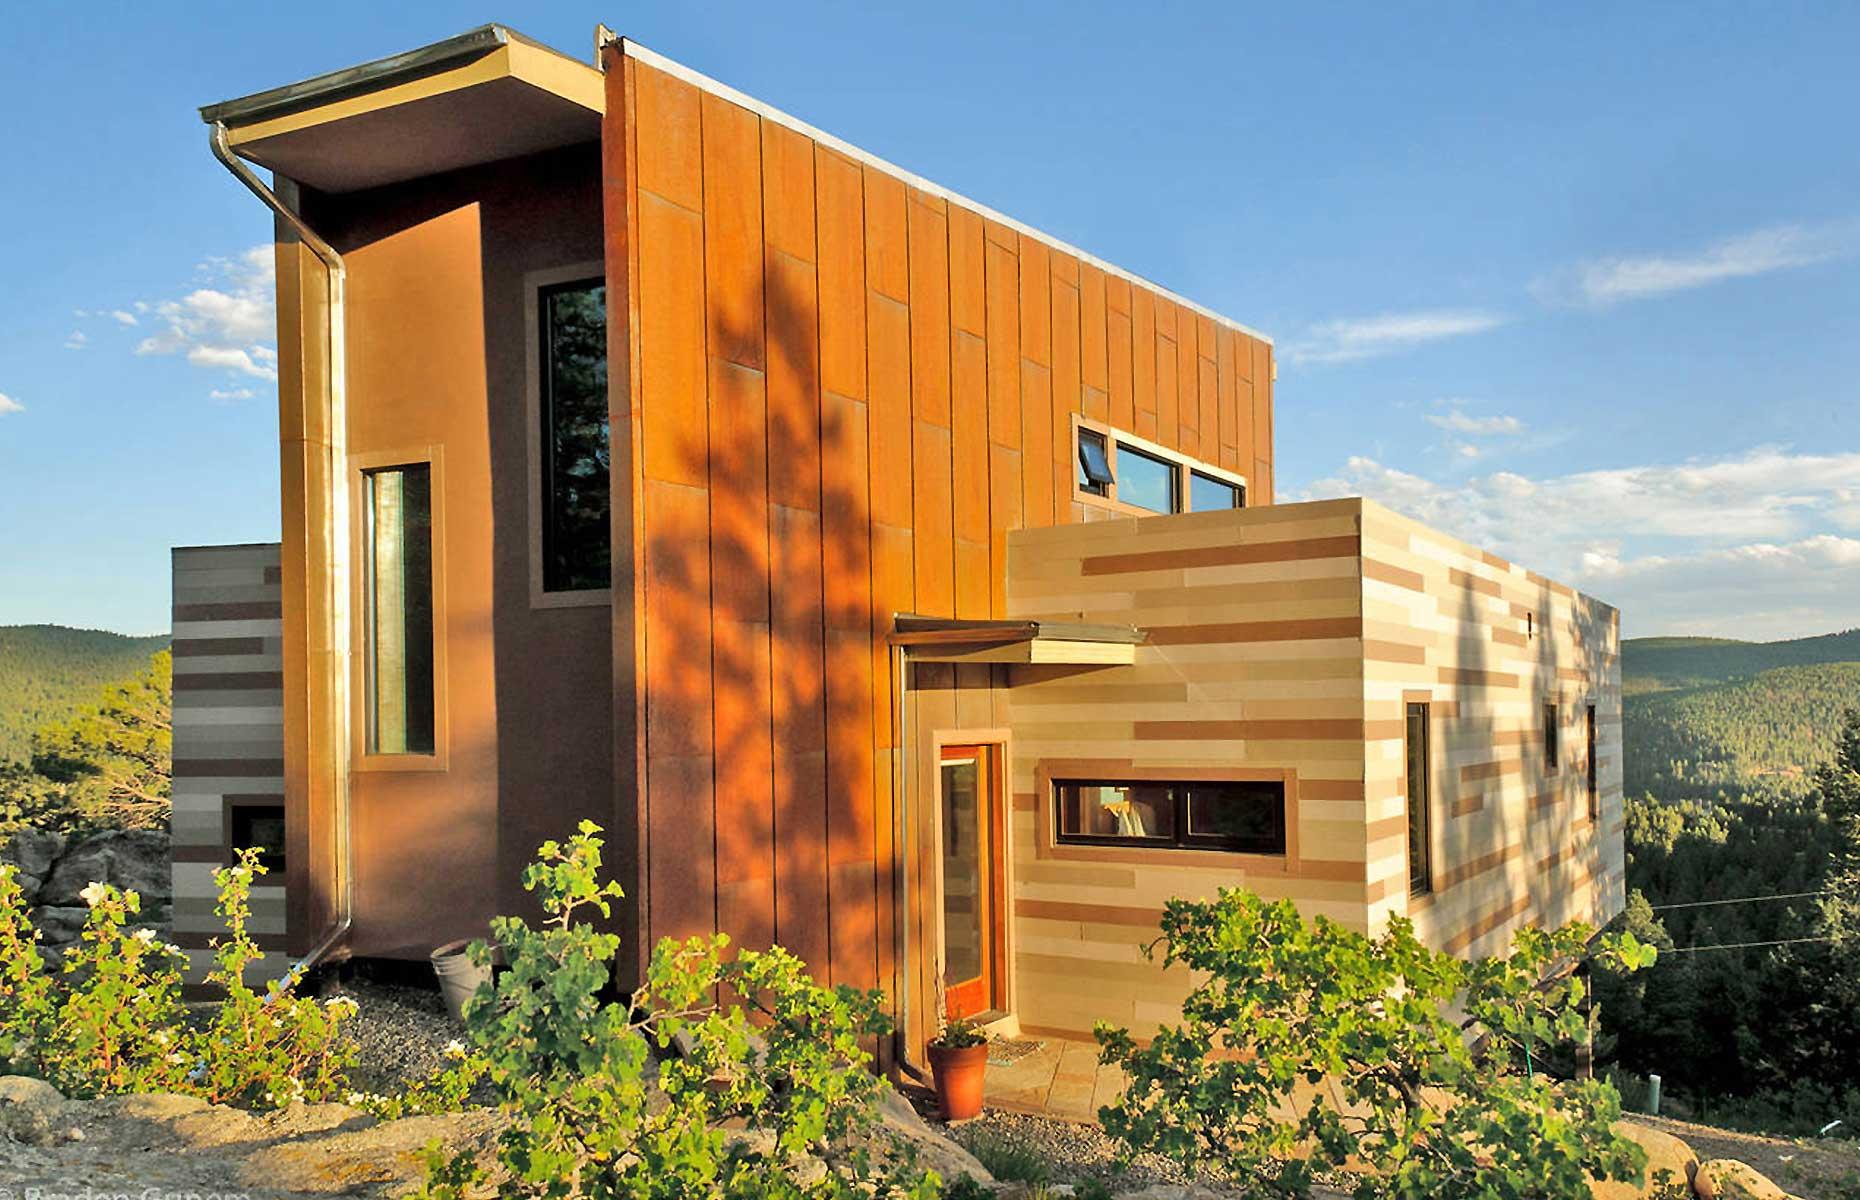 🌈 Vibrant and Colorful: Explore Container Home Designs That Break the  Mold!